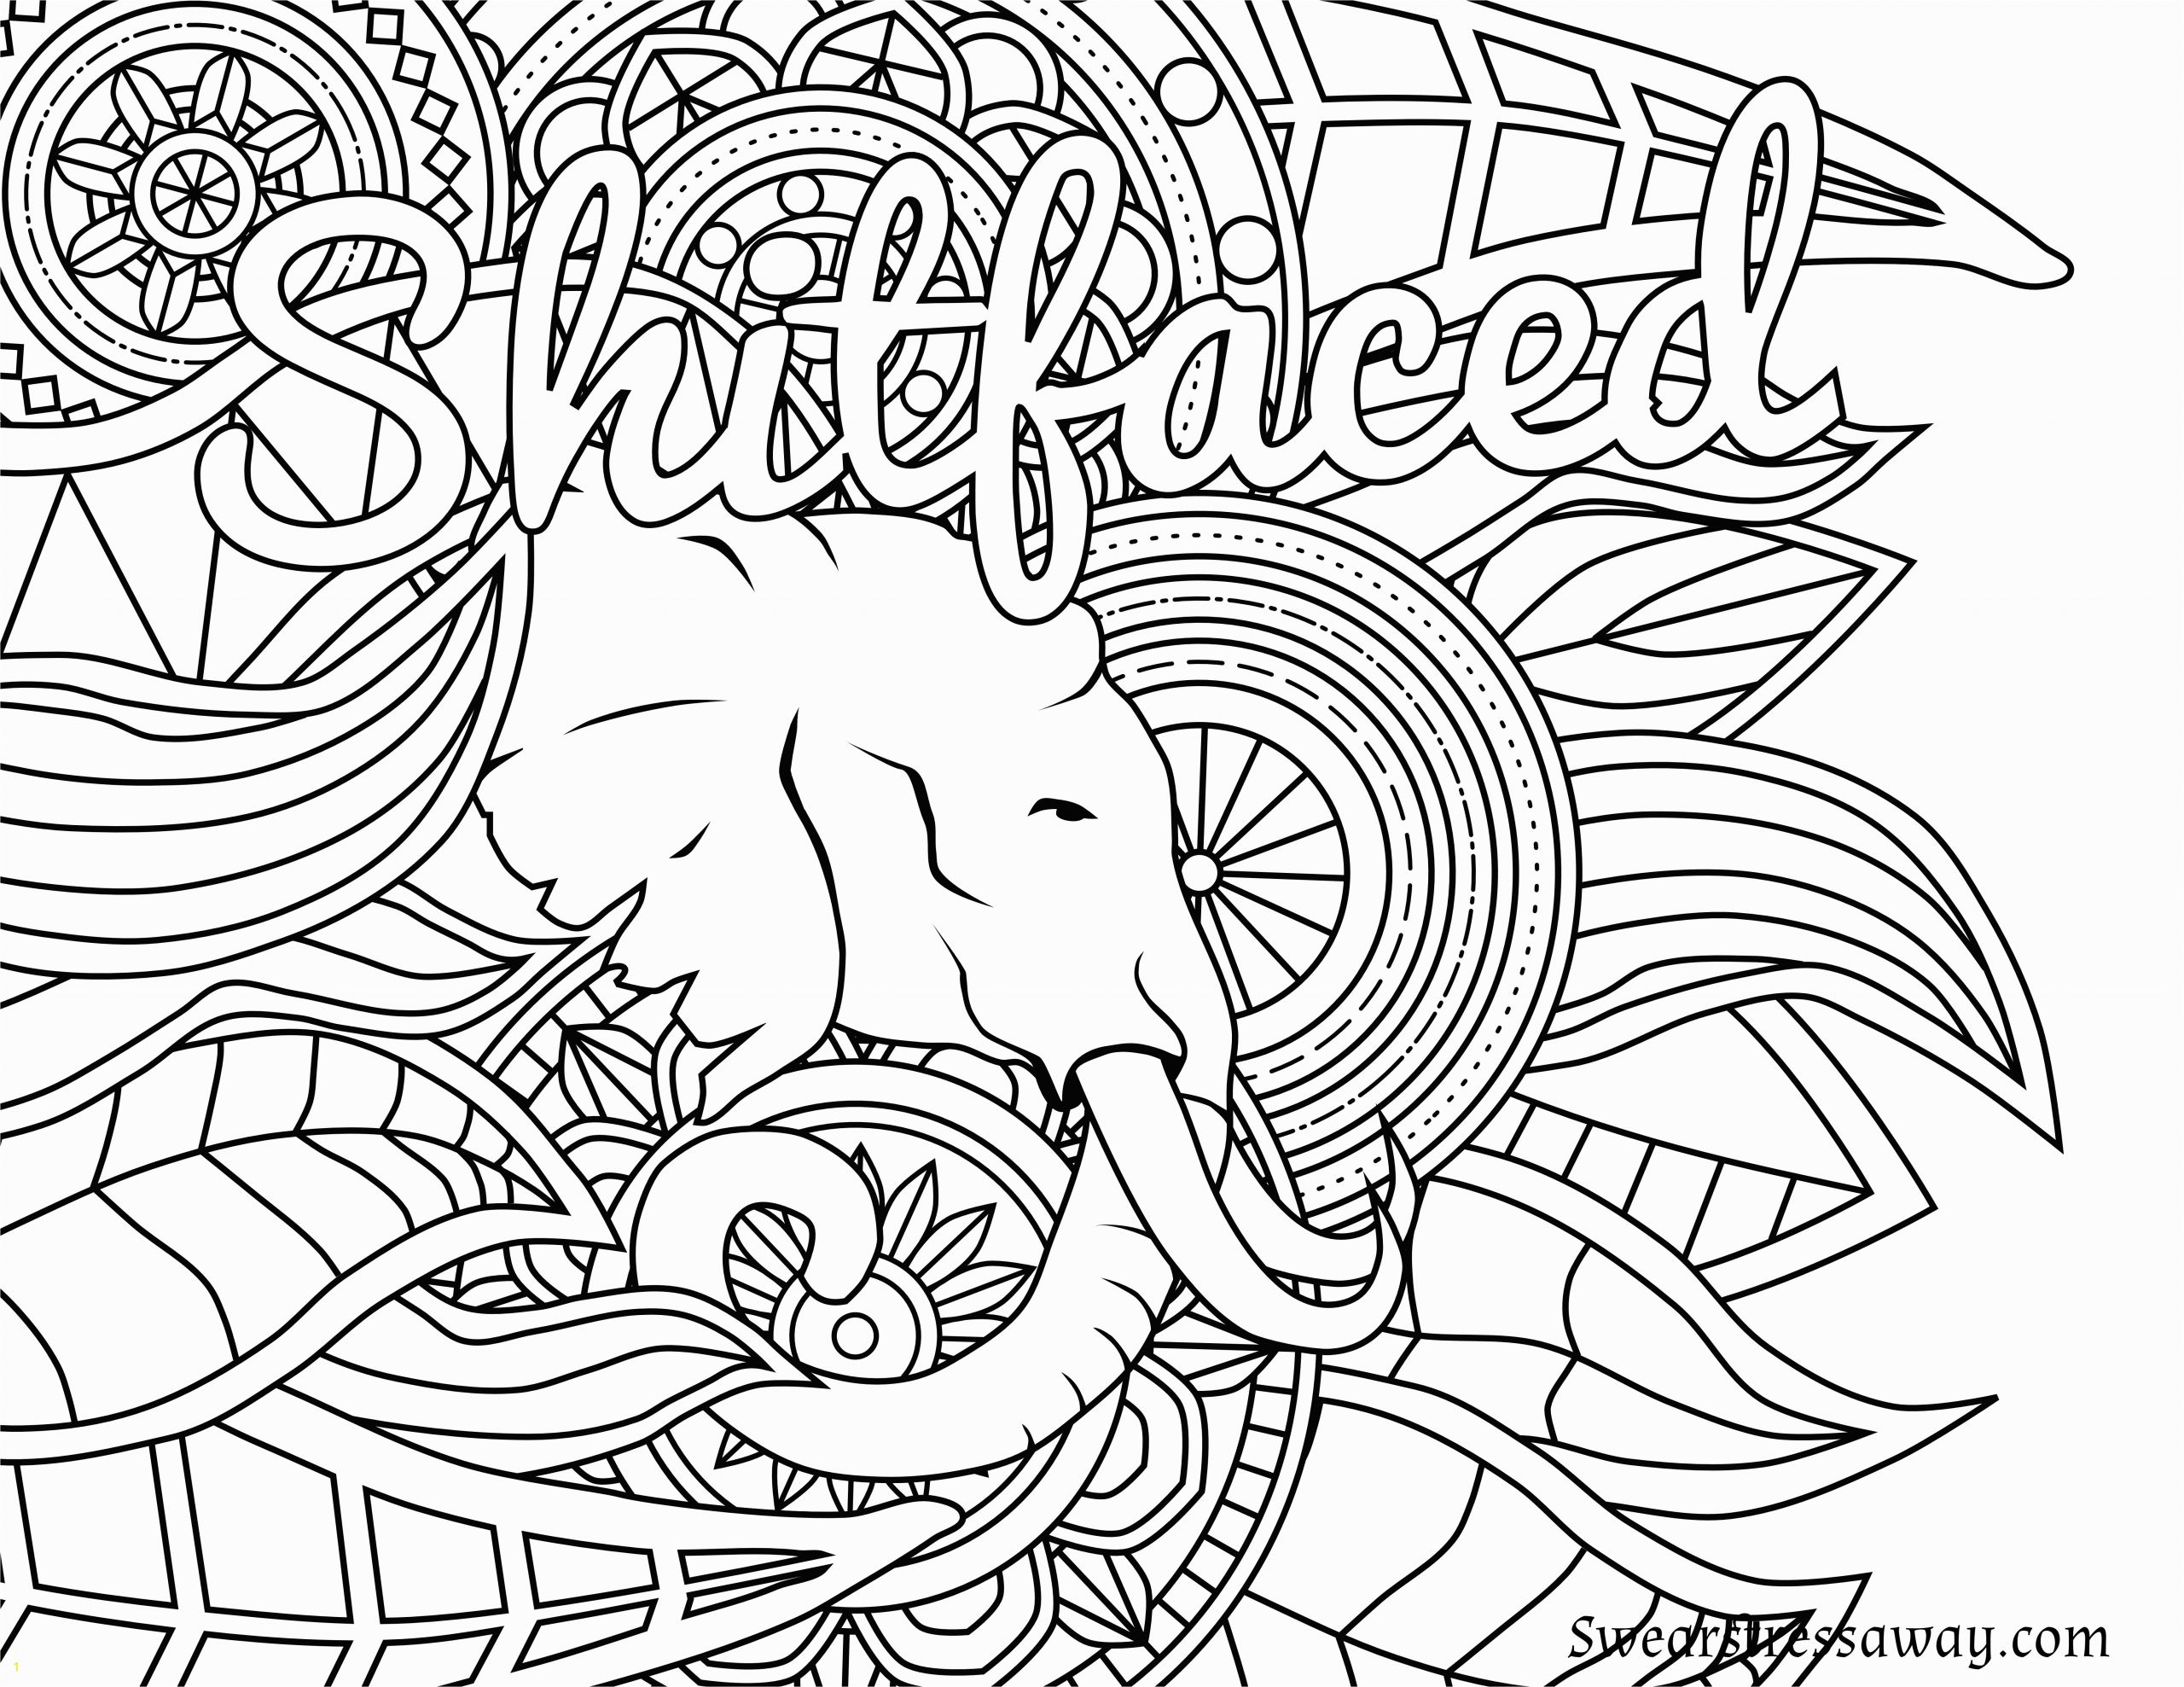 Free Printable Coloring Pages for Adults Swear Words Pin On Swear Word Coloring Pages